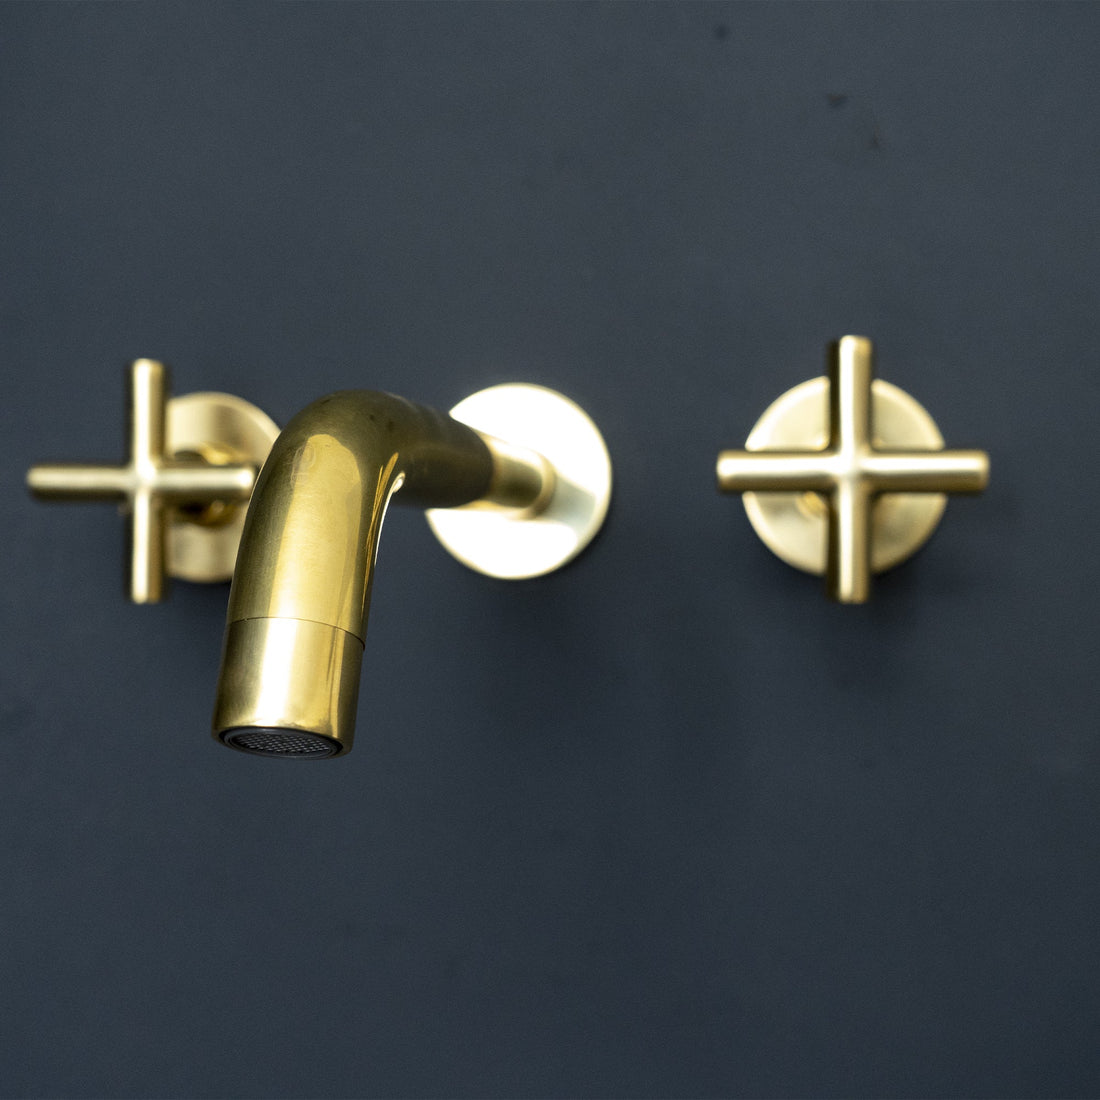 Wall Mounted Unlacquered Brass Faucet